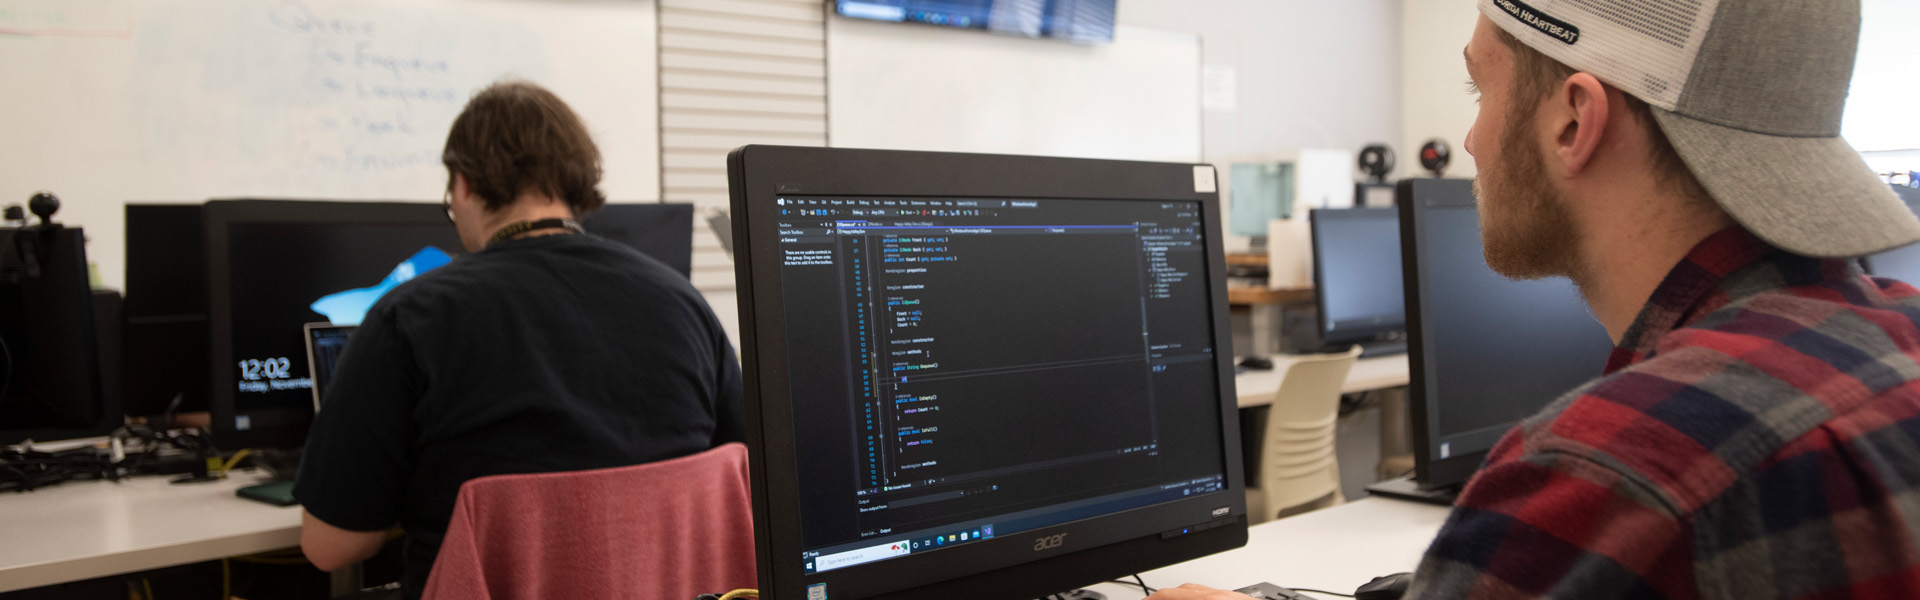 Students work on computer programming during a computer information systems class